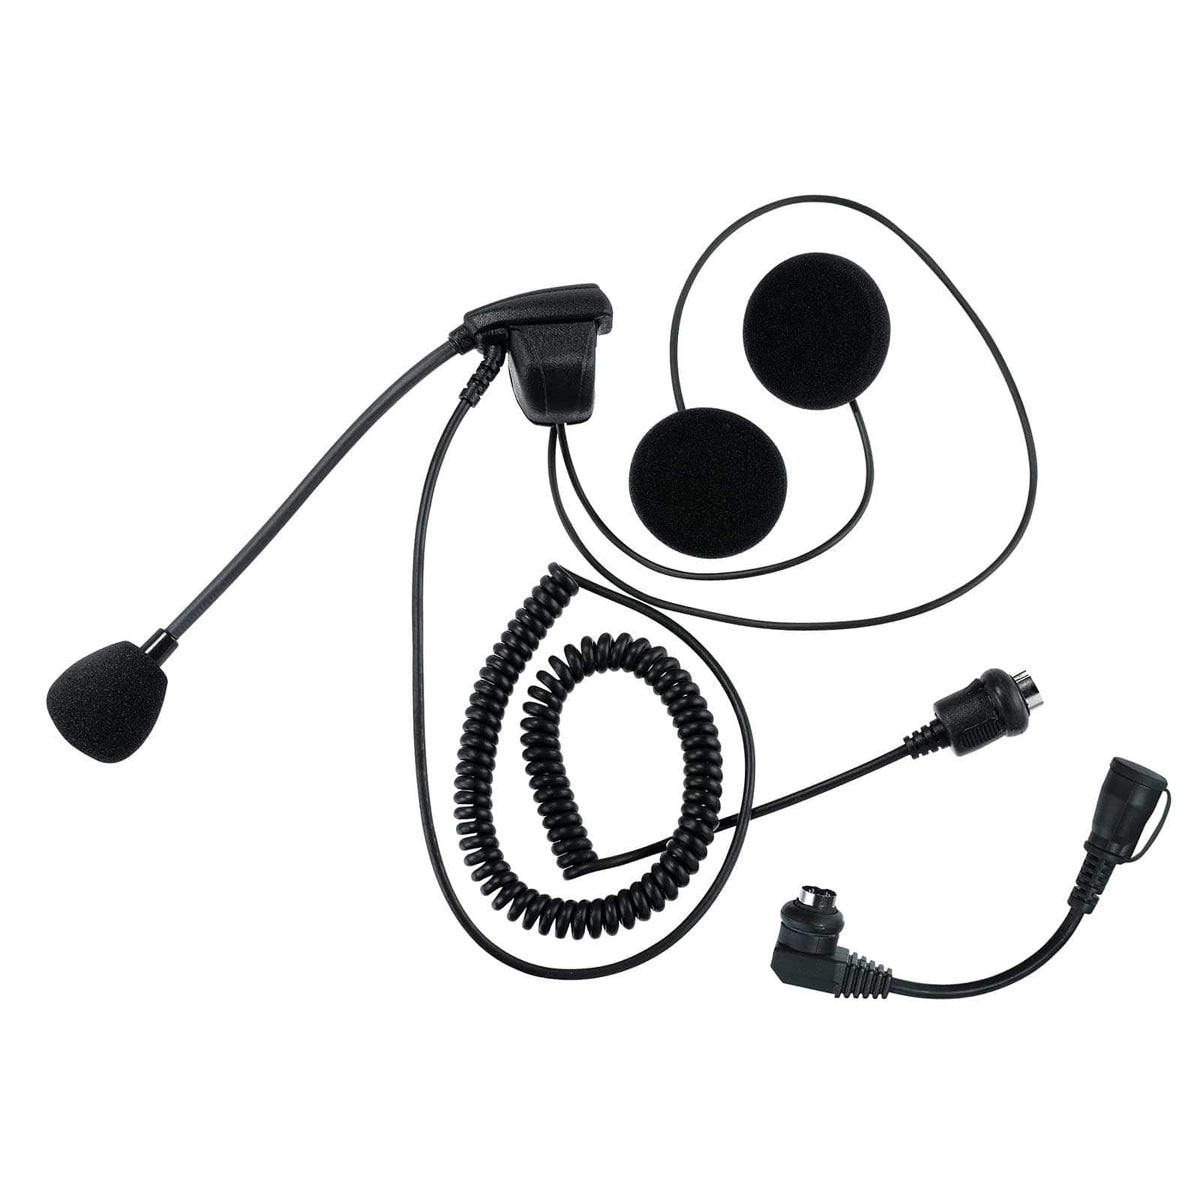 Communication Headset (wired)